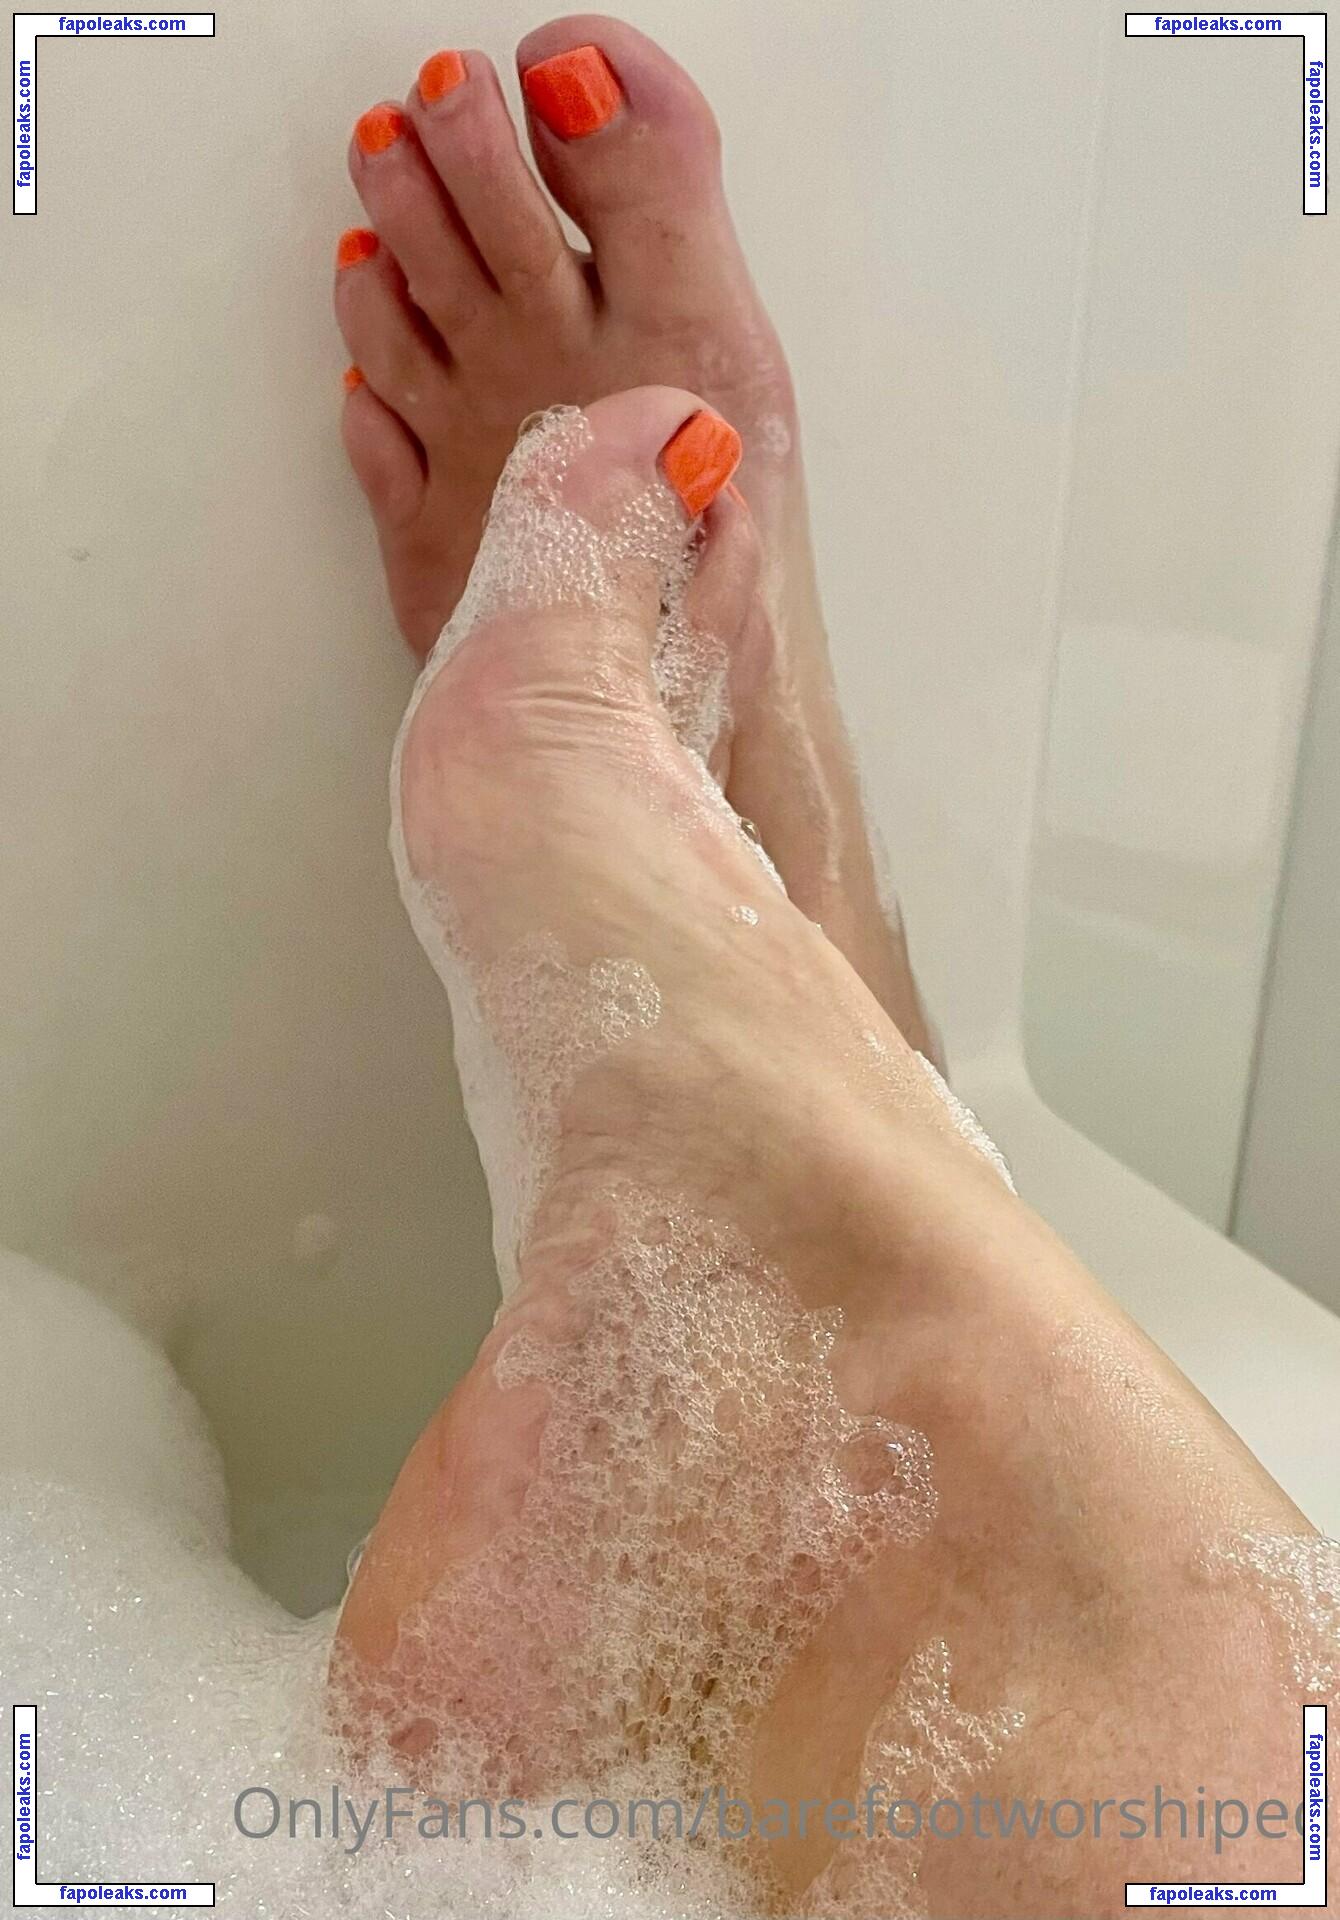 barefootworshiped / barefoot_sites nude photo #0008 from OnlyFans